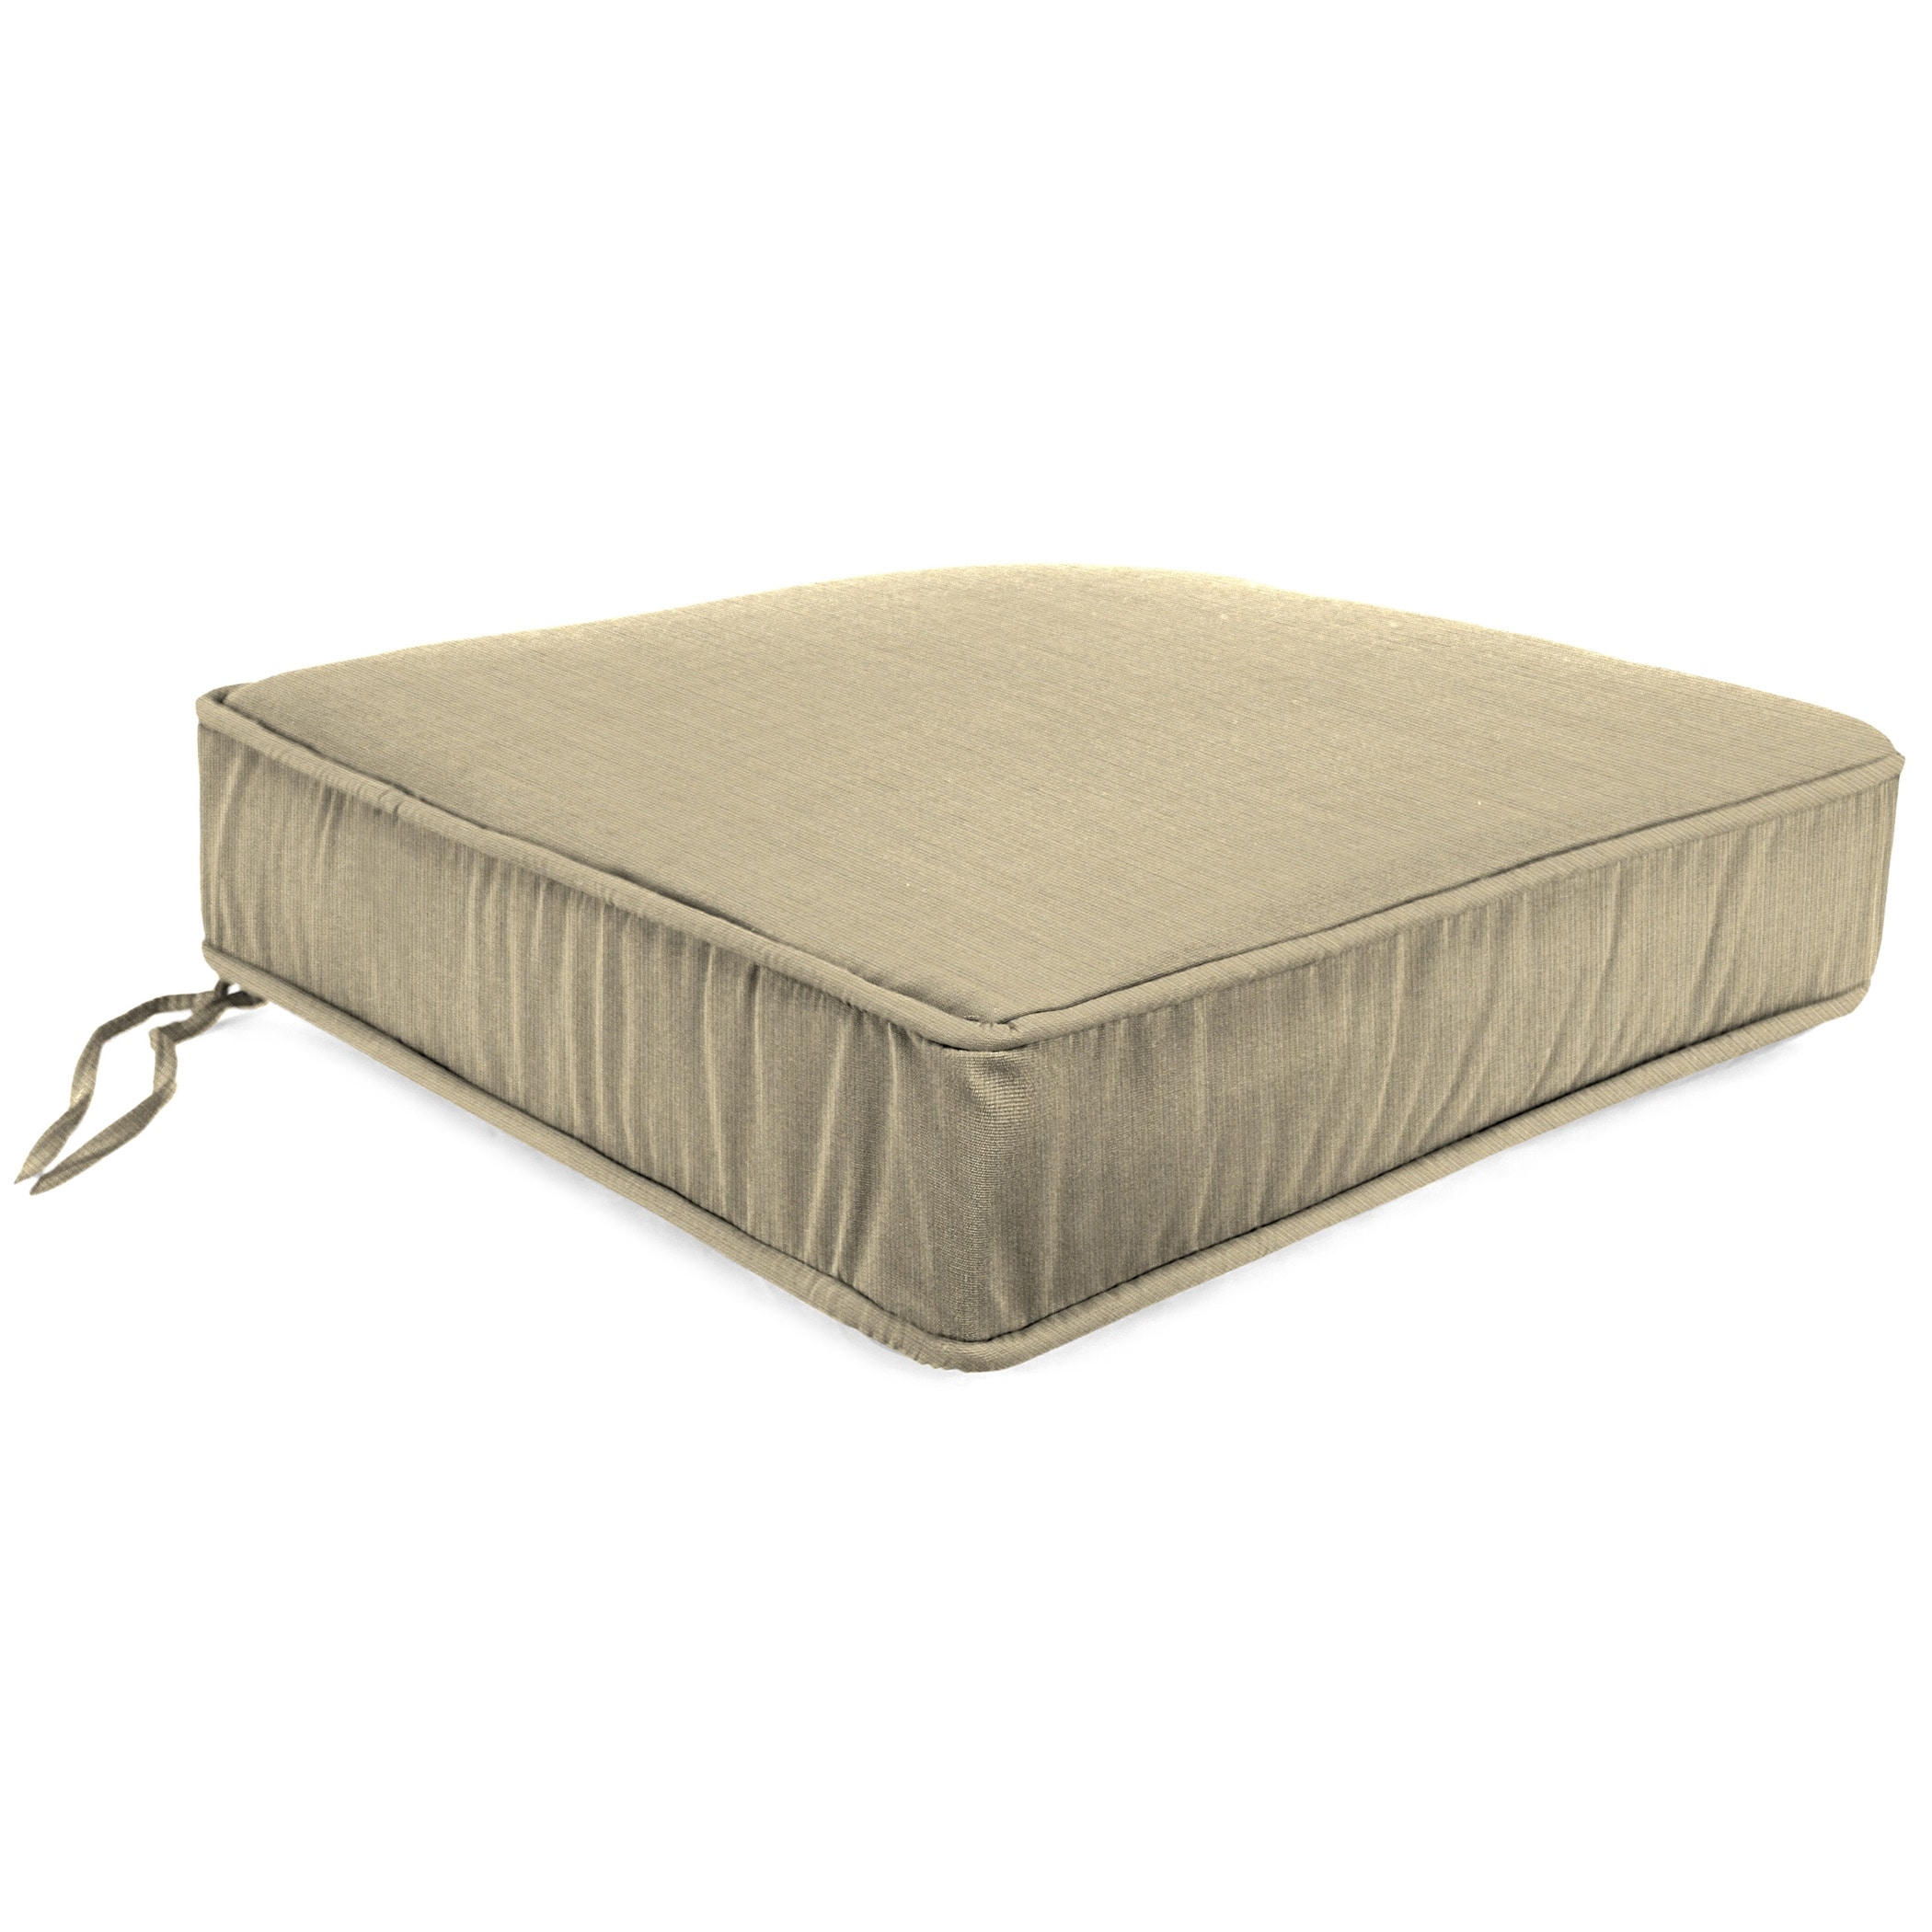 Sunbrella 22.5" x 21.5" Beige Solid Outdoor Deep Seat Cushion with Ties and Welt - 21.5'' L x 22.5'' W x 4'' H